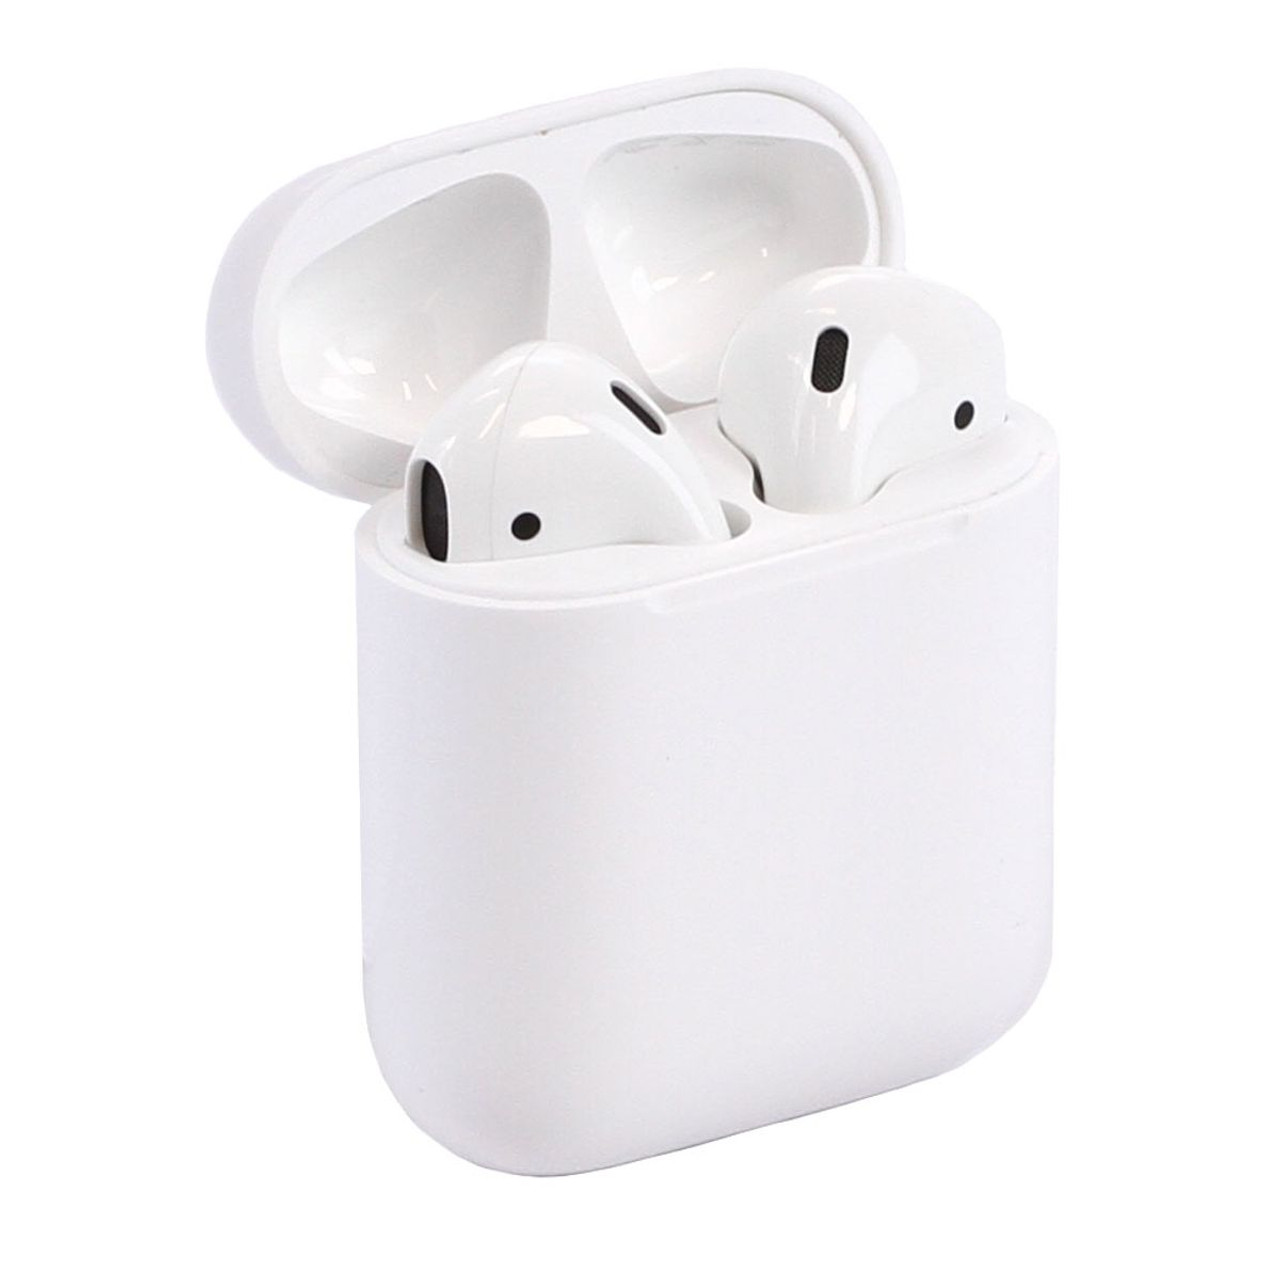 Apple® AirPods 2 with Charging Case & MFI Cable, MV7N2AM/A product image